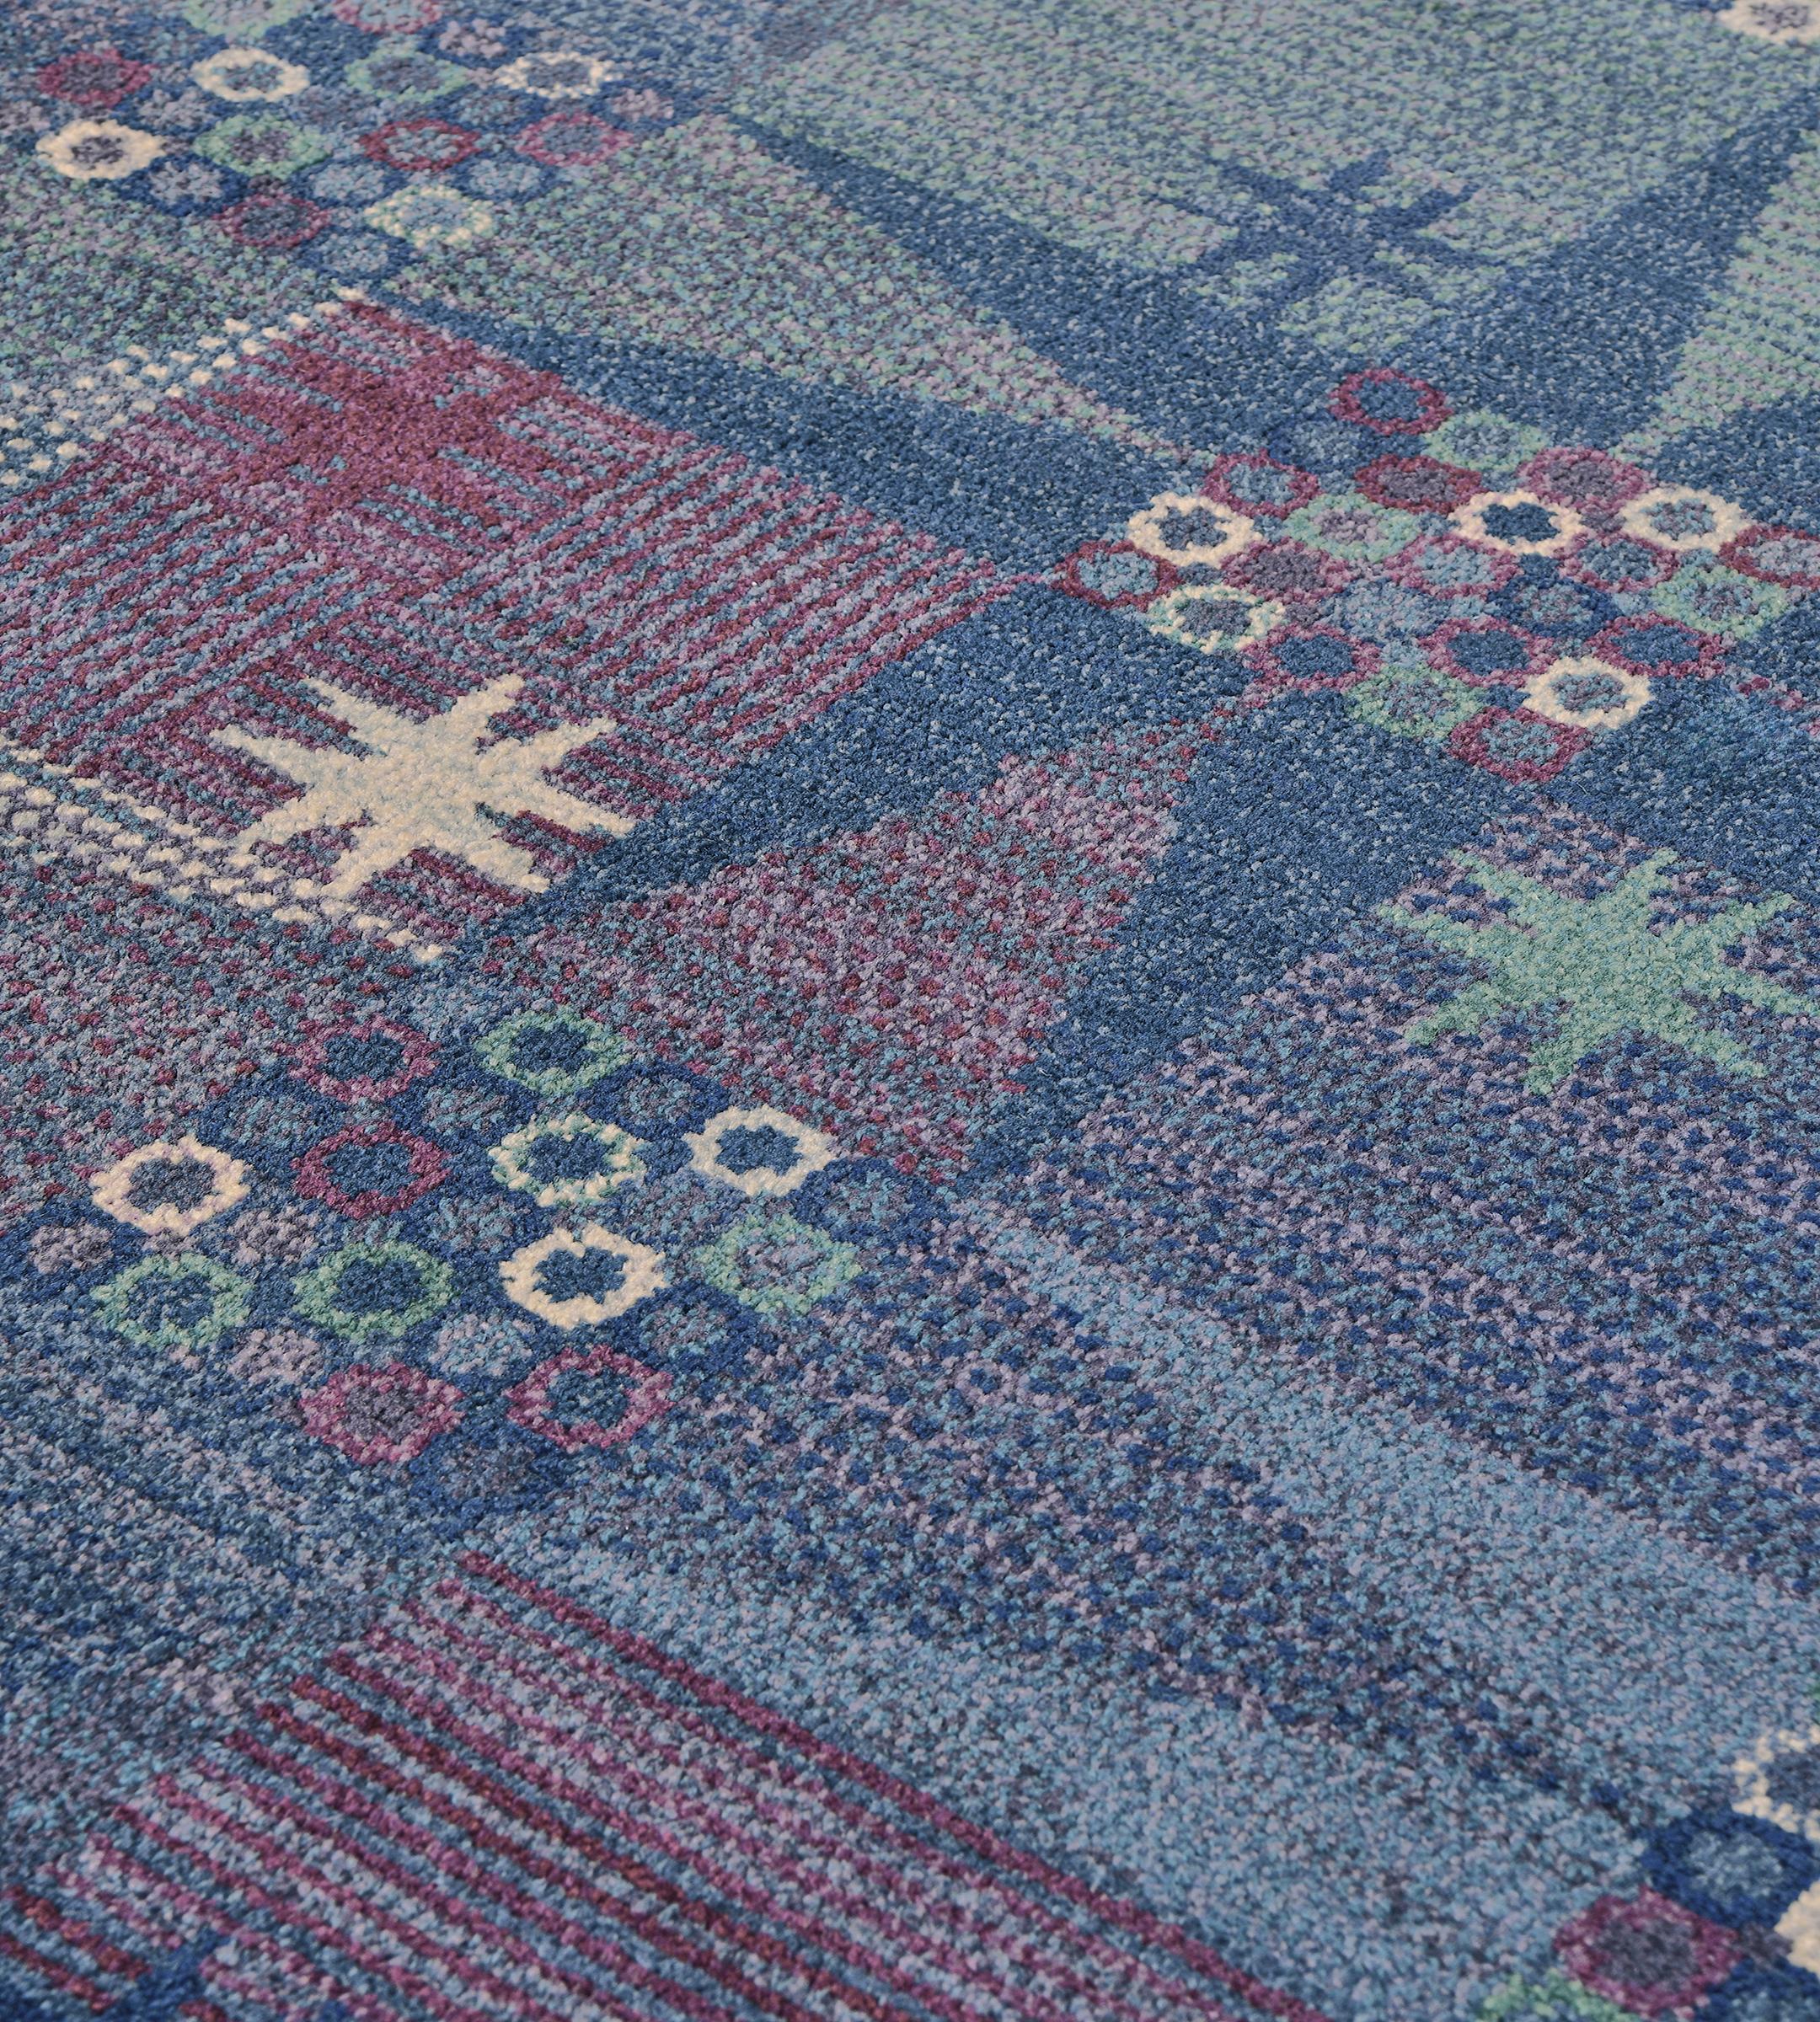 Hand-Woven Mid-20th Century Marta Maas-Fjetterström AB Swedish Rug by Barbro Nilsson For Sale